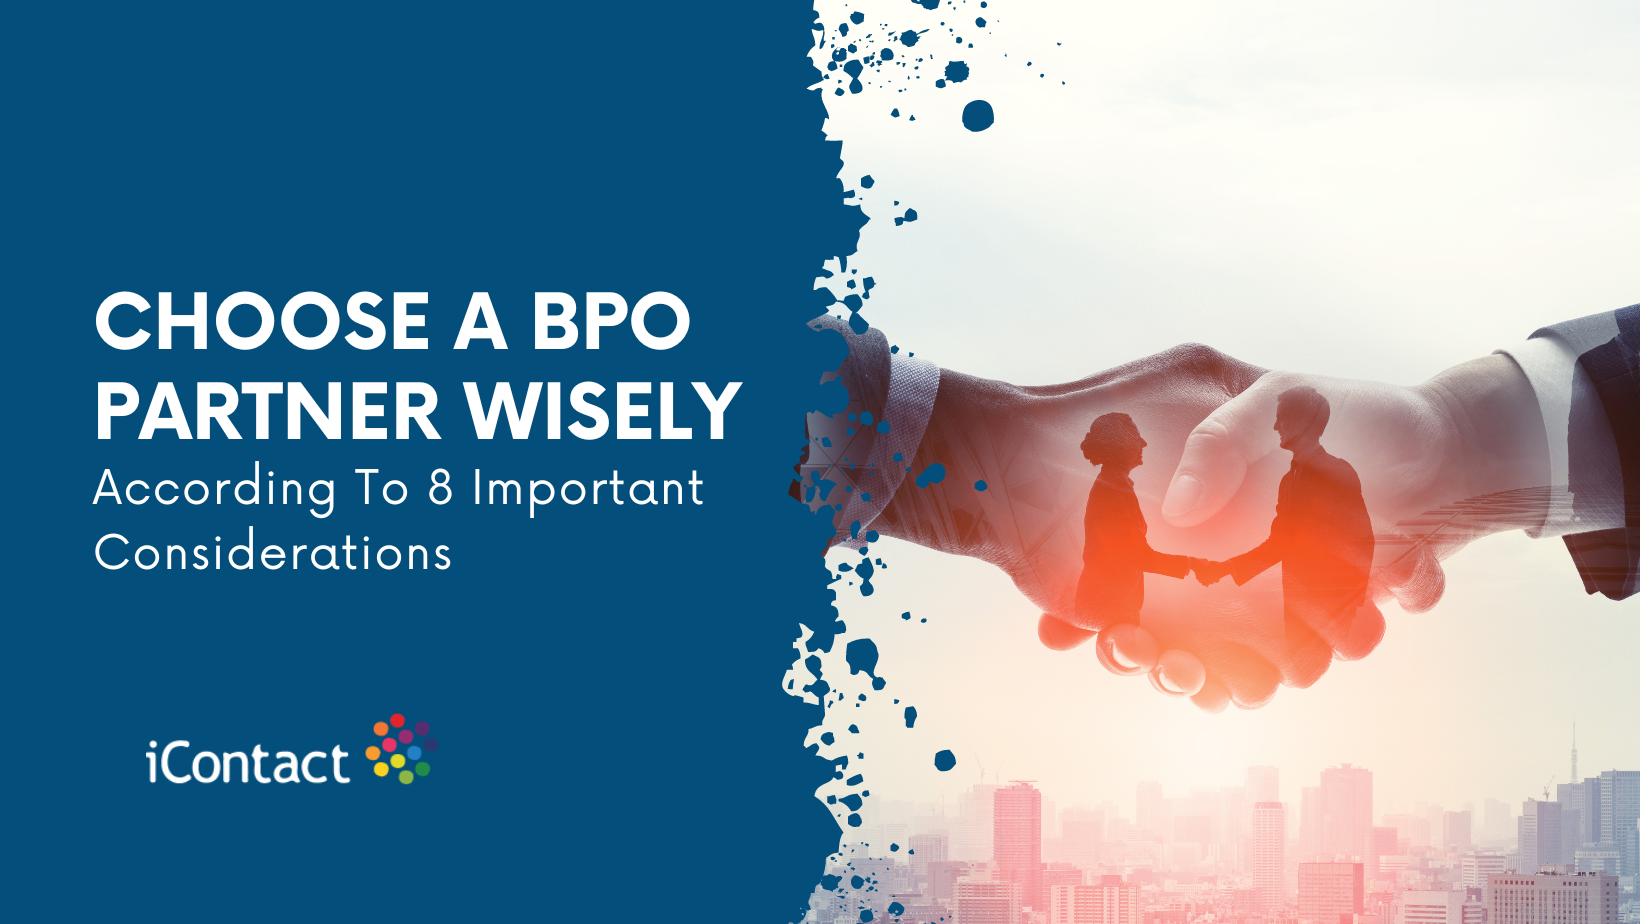 Choose A BPO Partner Wisely According To 8 Important Considerations